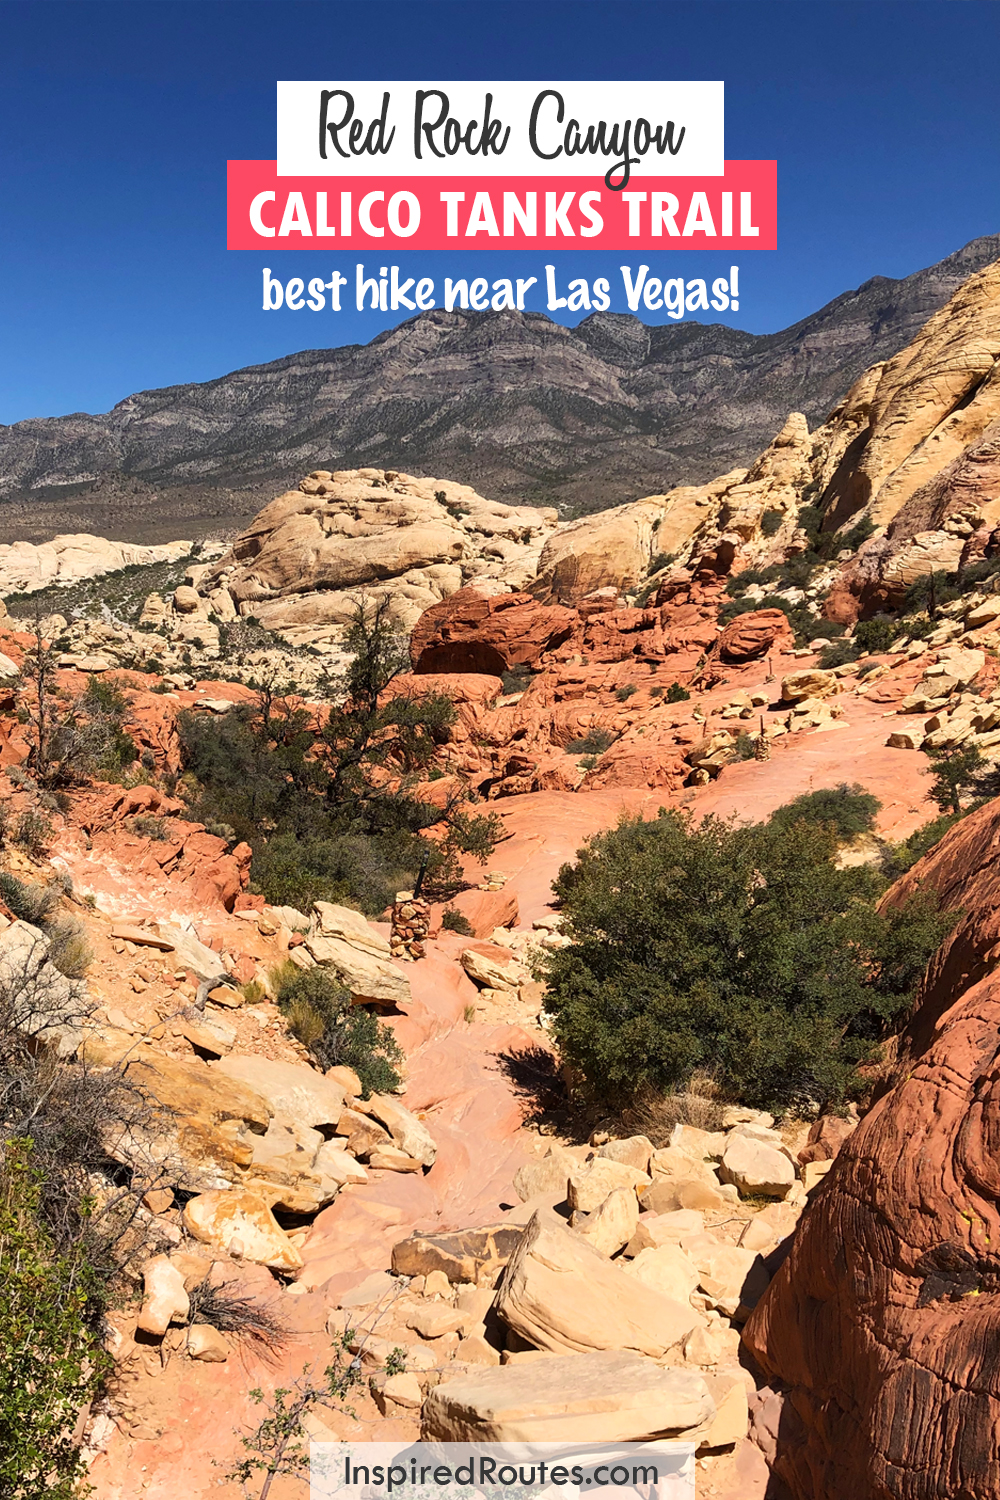 red rock canyon calico tanks trail best hike near Las Vegas with view of rocky trail in multicolored rocks